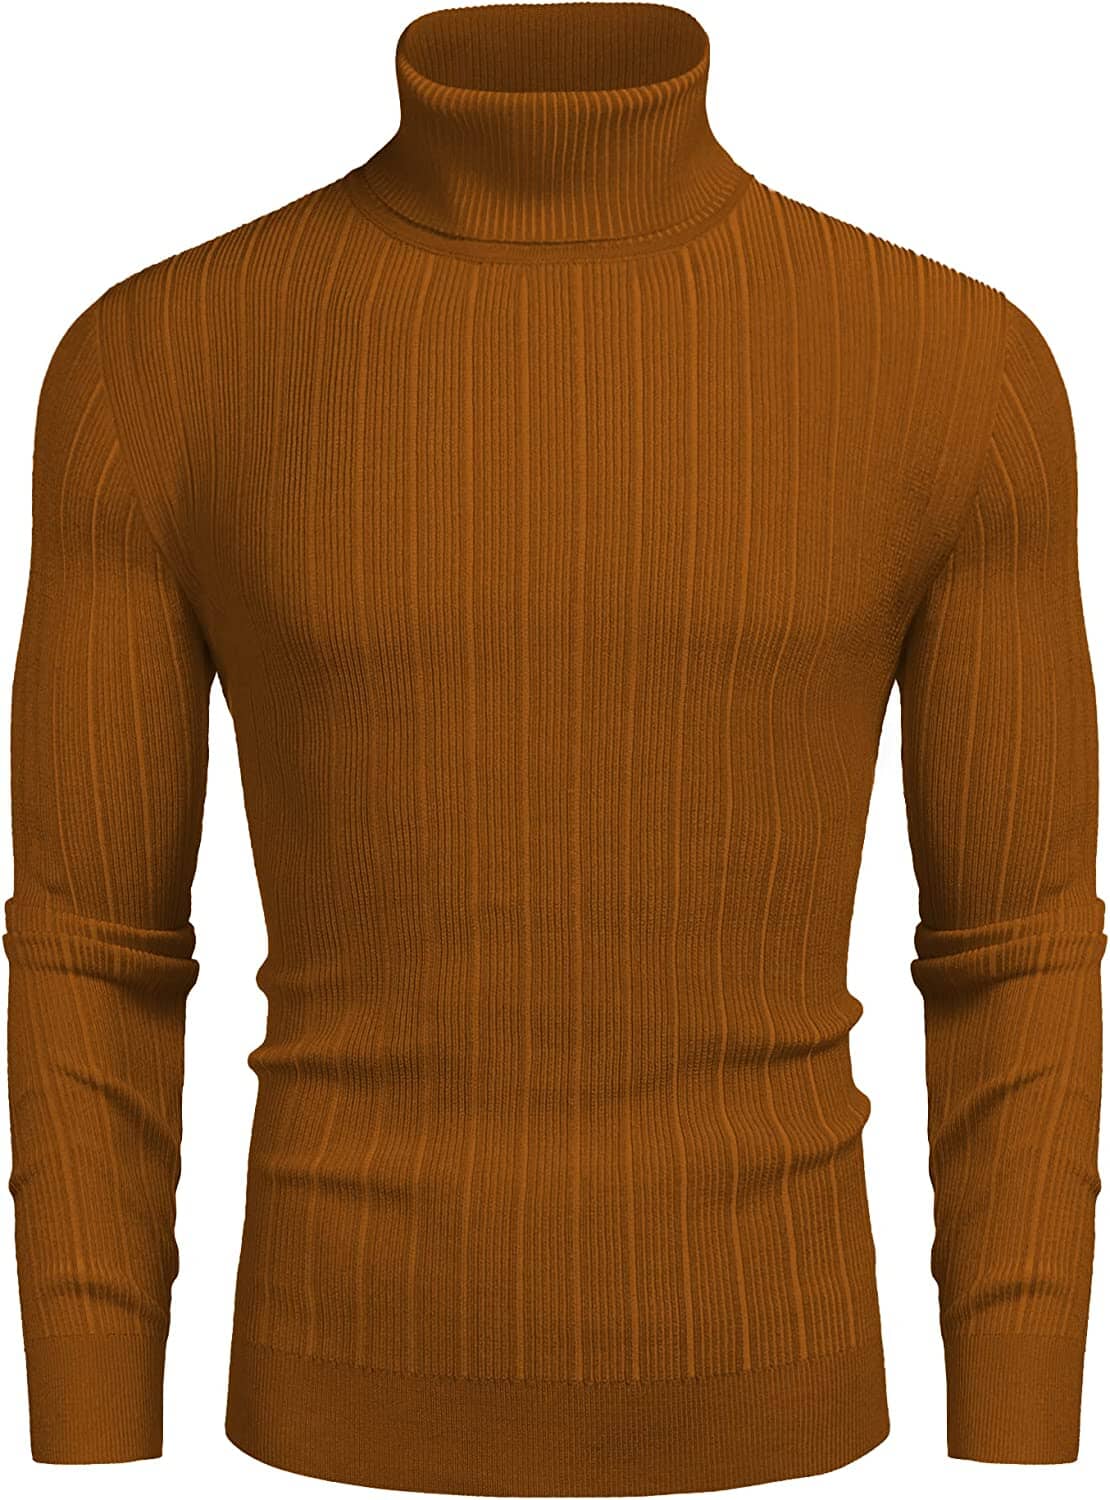 Slim Fit Knitted High Neck Pullover Sweaters (US Only) Sweaters COOFANDY Store Brown S 